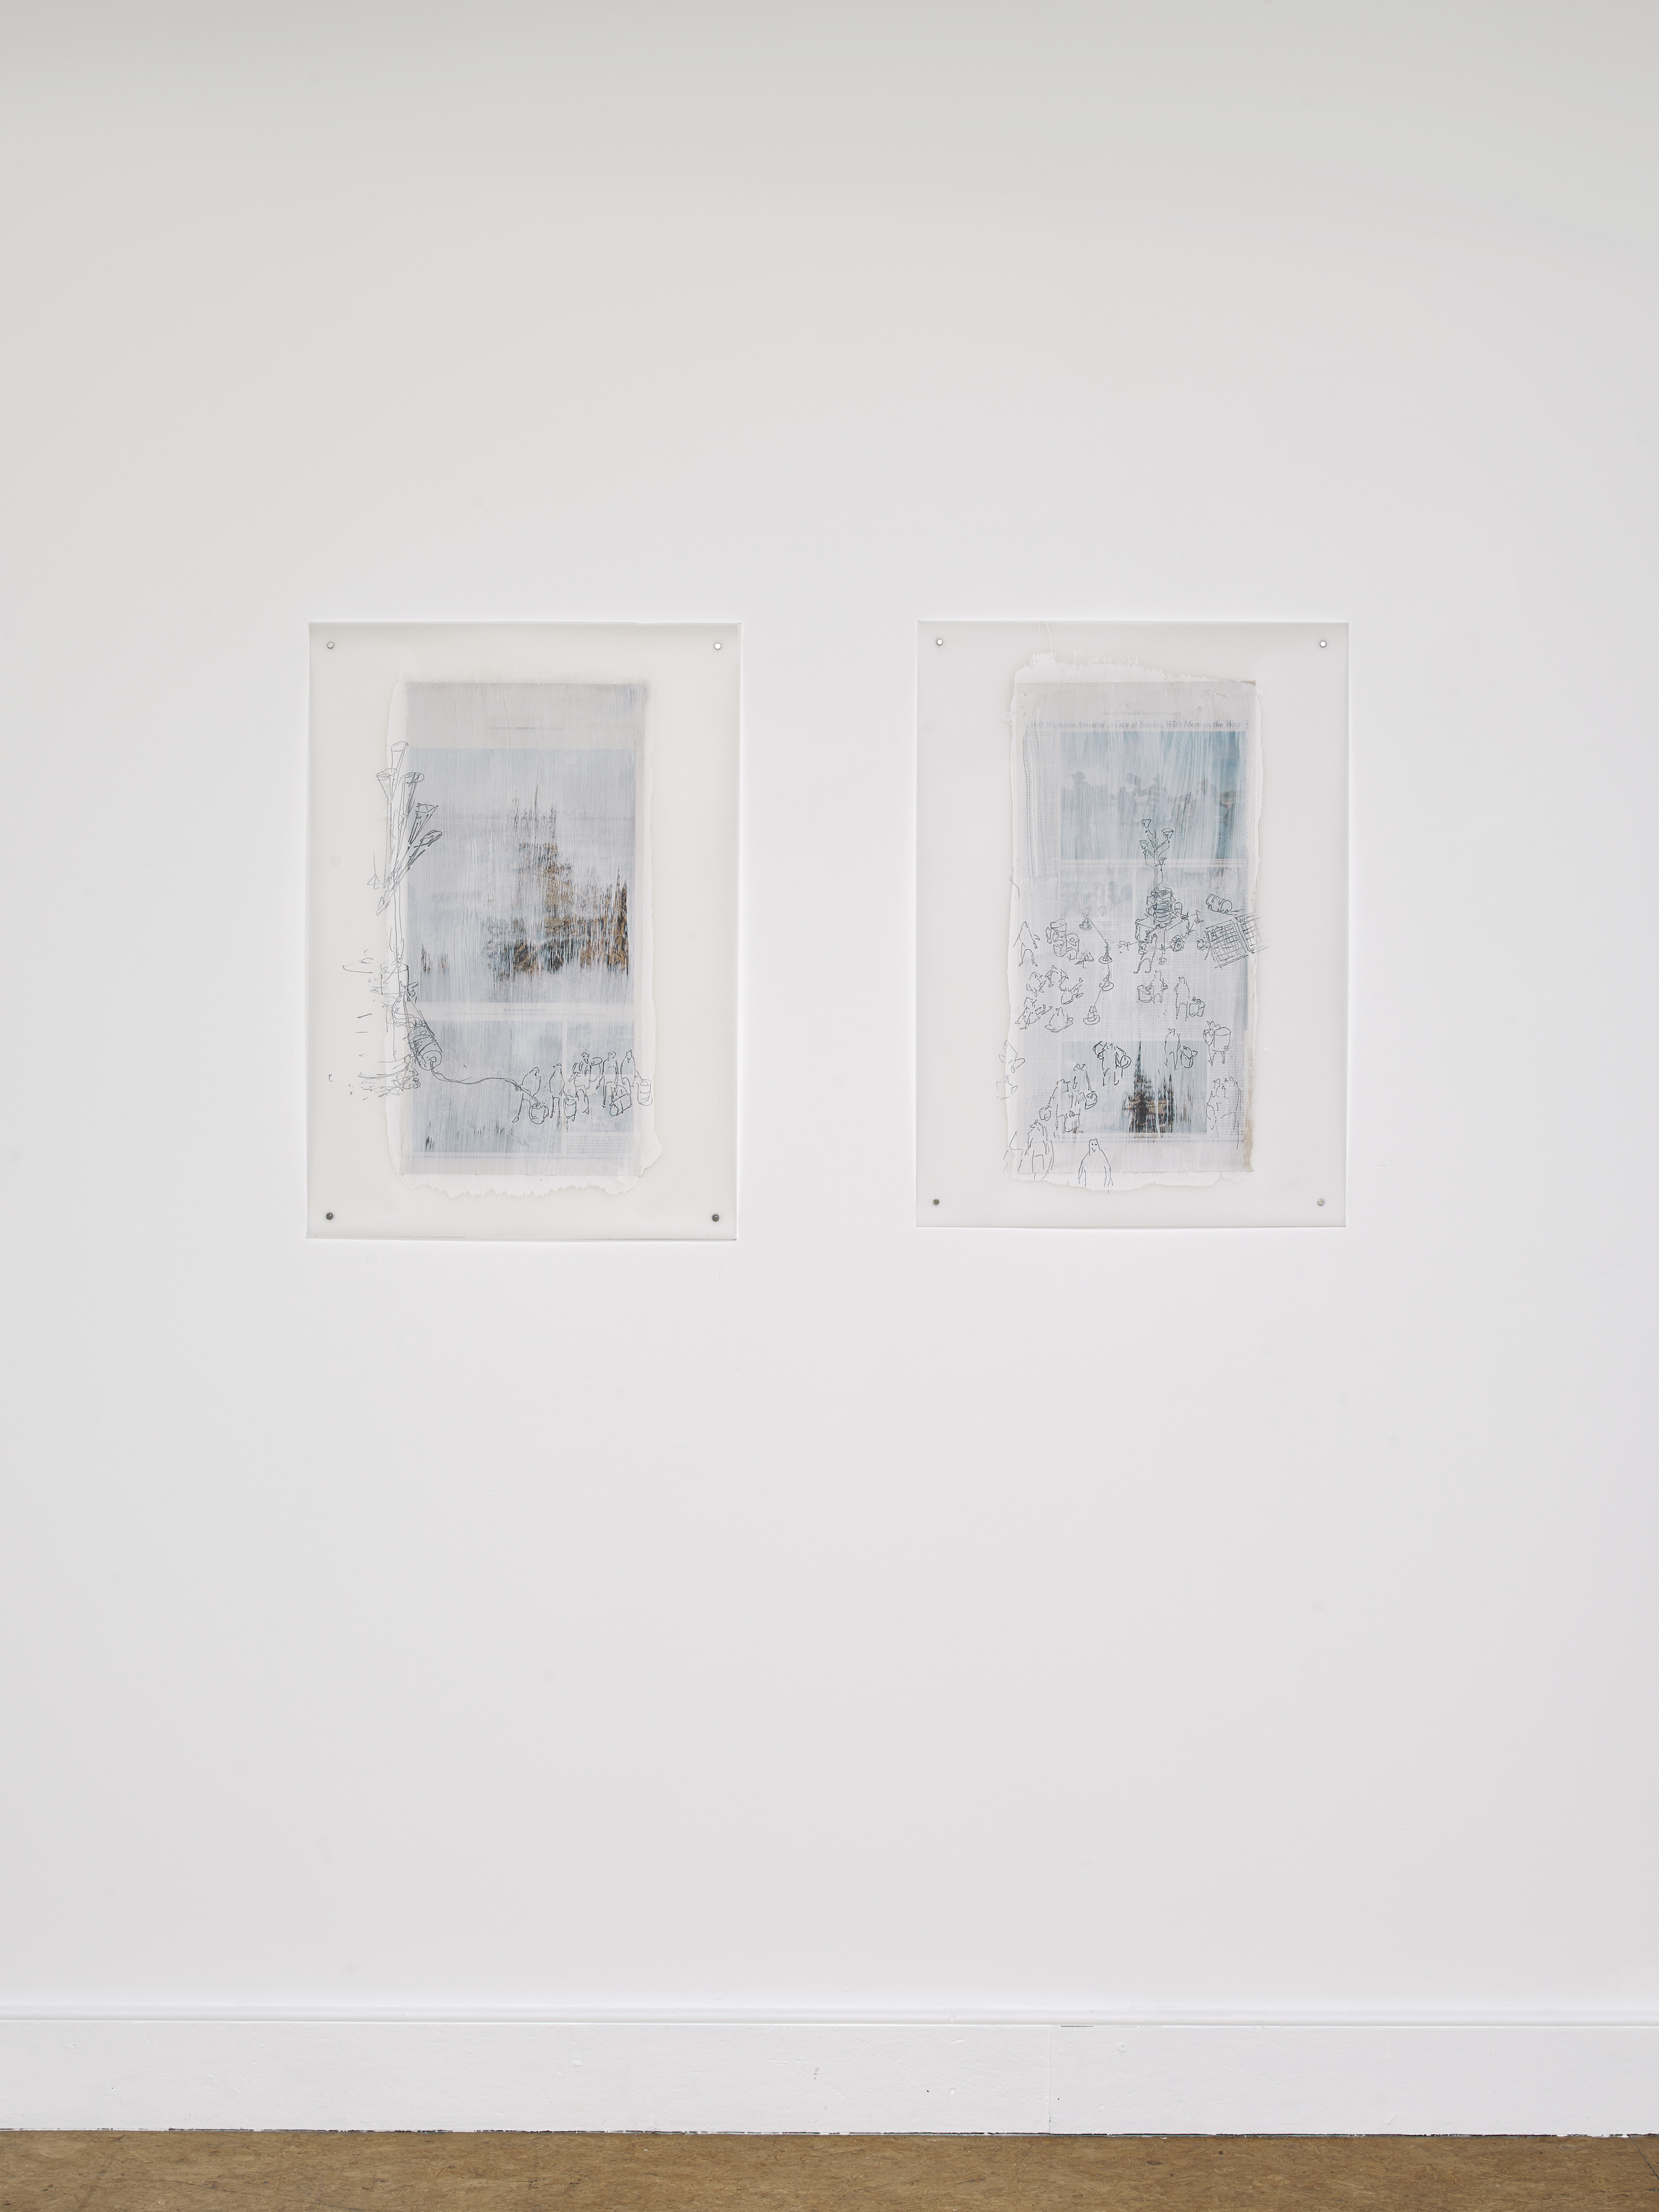 l–r Monumental returns, Sgraffito on Gesso on Newsprint on Mylar, 28.5 x 20’’ 2023, Convening at the water line, Sgraffito on Gesso on Newsprint on Mylar, 28 x 20’’ 2024 (CAN ALTAY: 22)